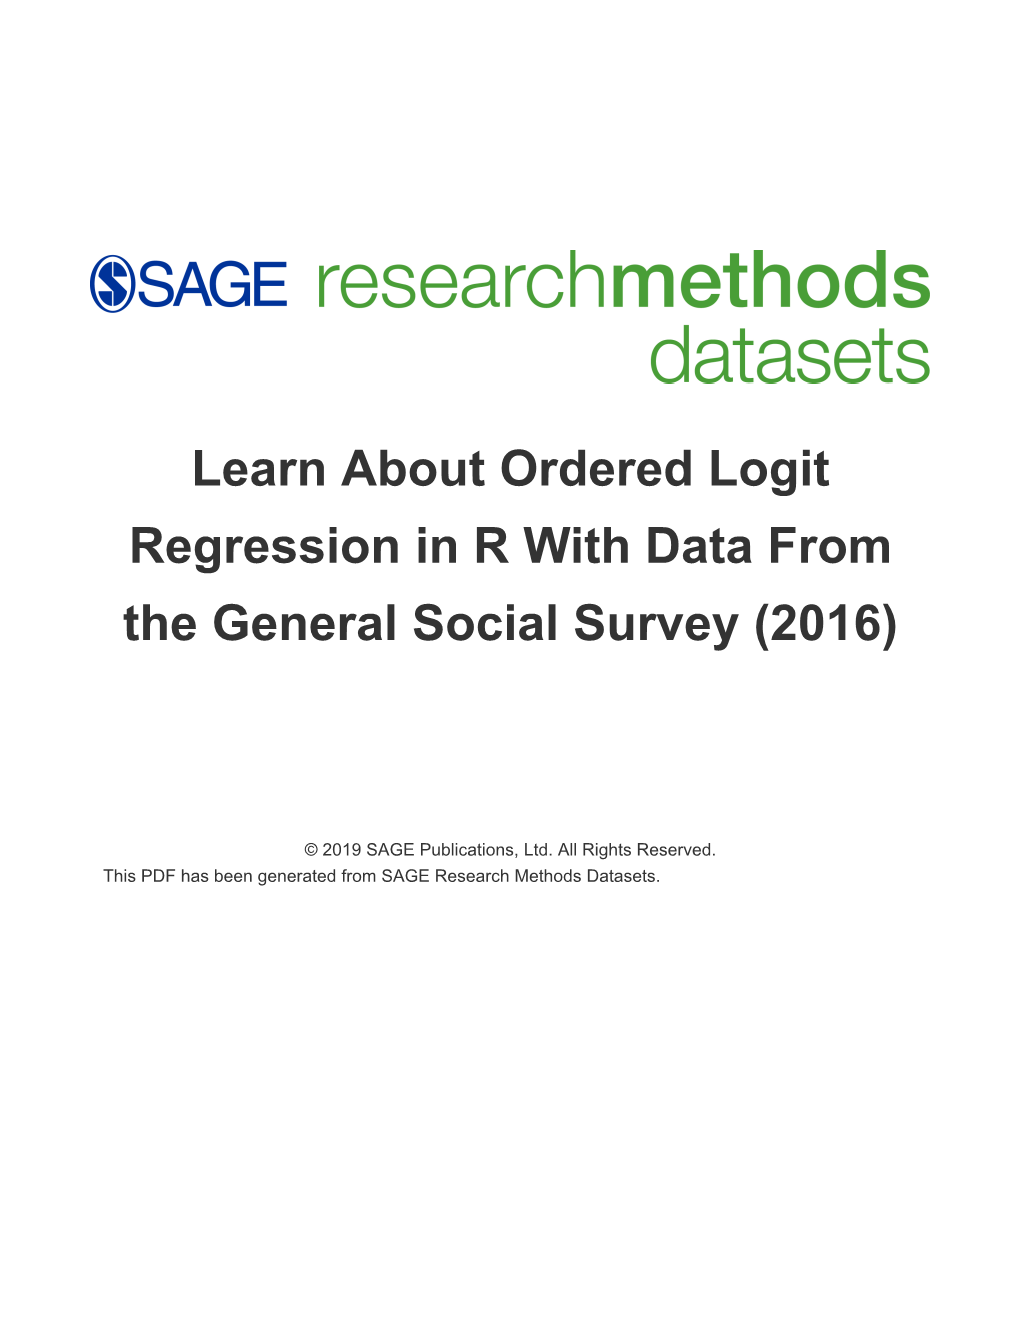 Learn About Ordered Logit Regression in R with Data from the General Social Survey (2016)